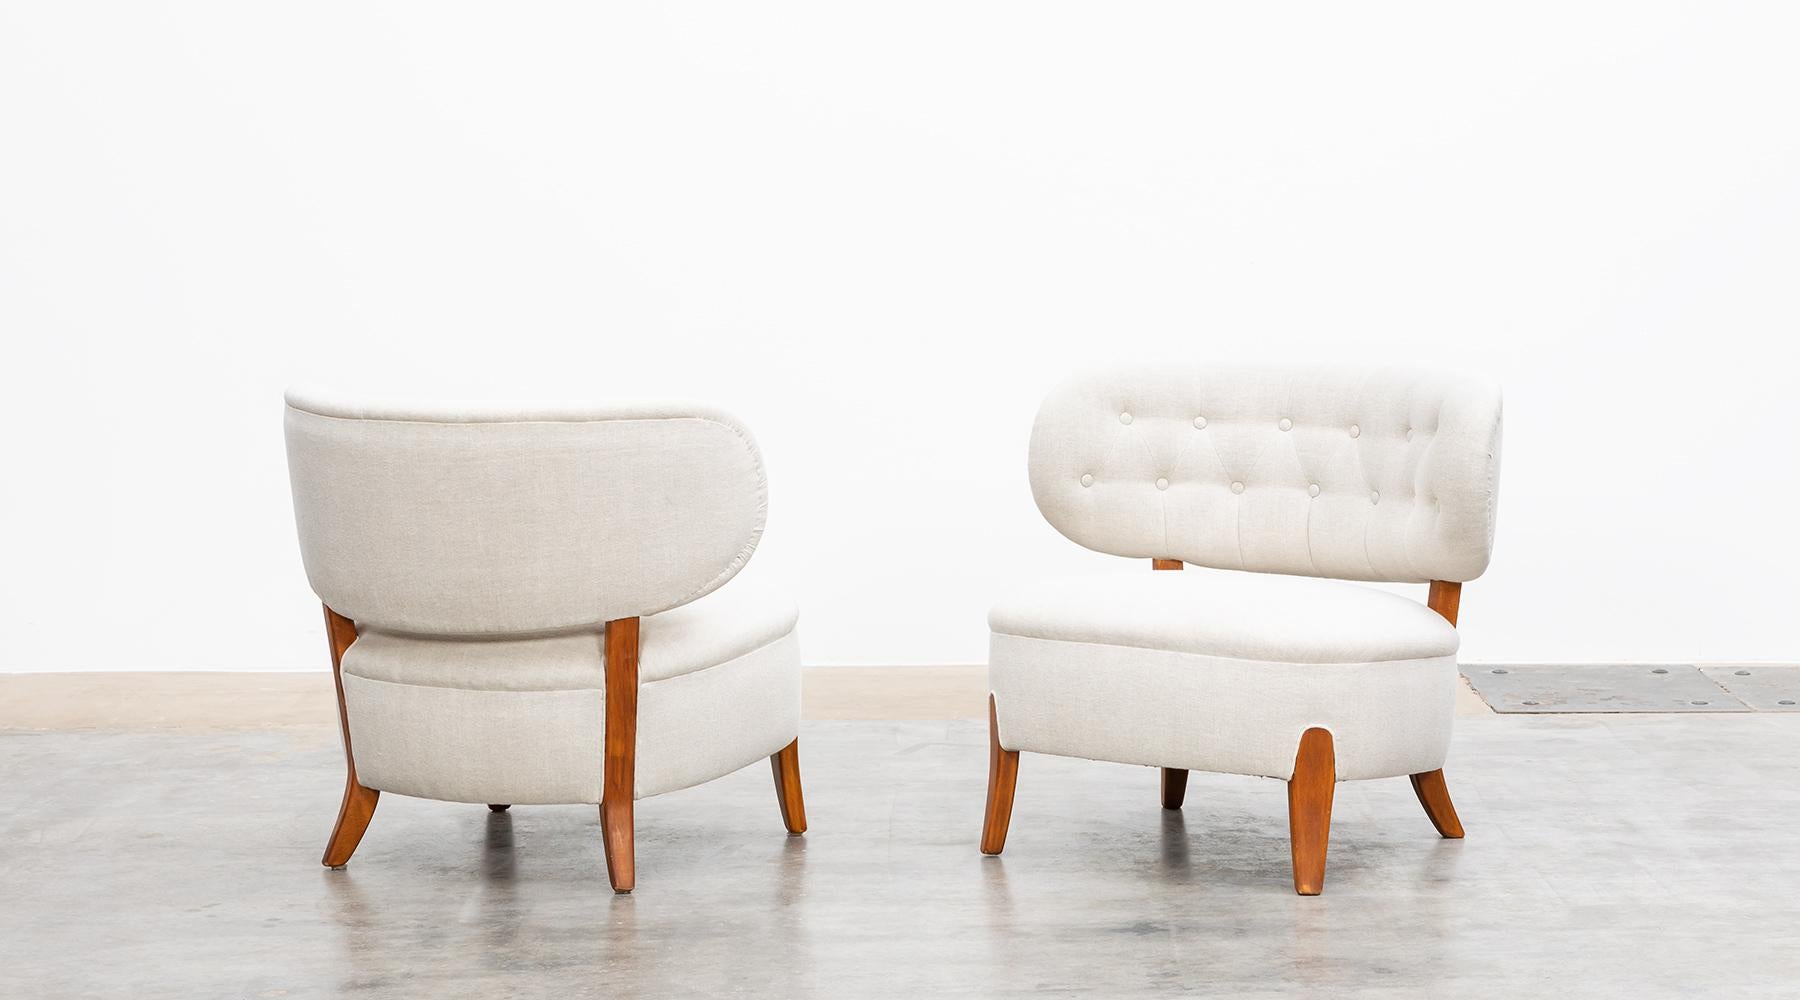 Otto Schulz for Boet, lounge chairs in ash newly upholstered, Sweden, 1940.

This beautiful pair of lounge chairs designed by Otto Schulz comes with a curved back decorated with buttons. Seat and back are newly upholstered, the frame and legs are